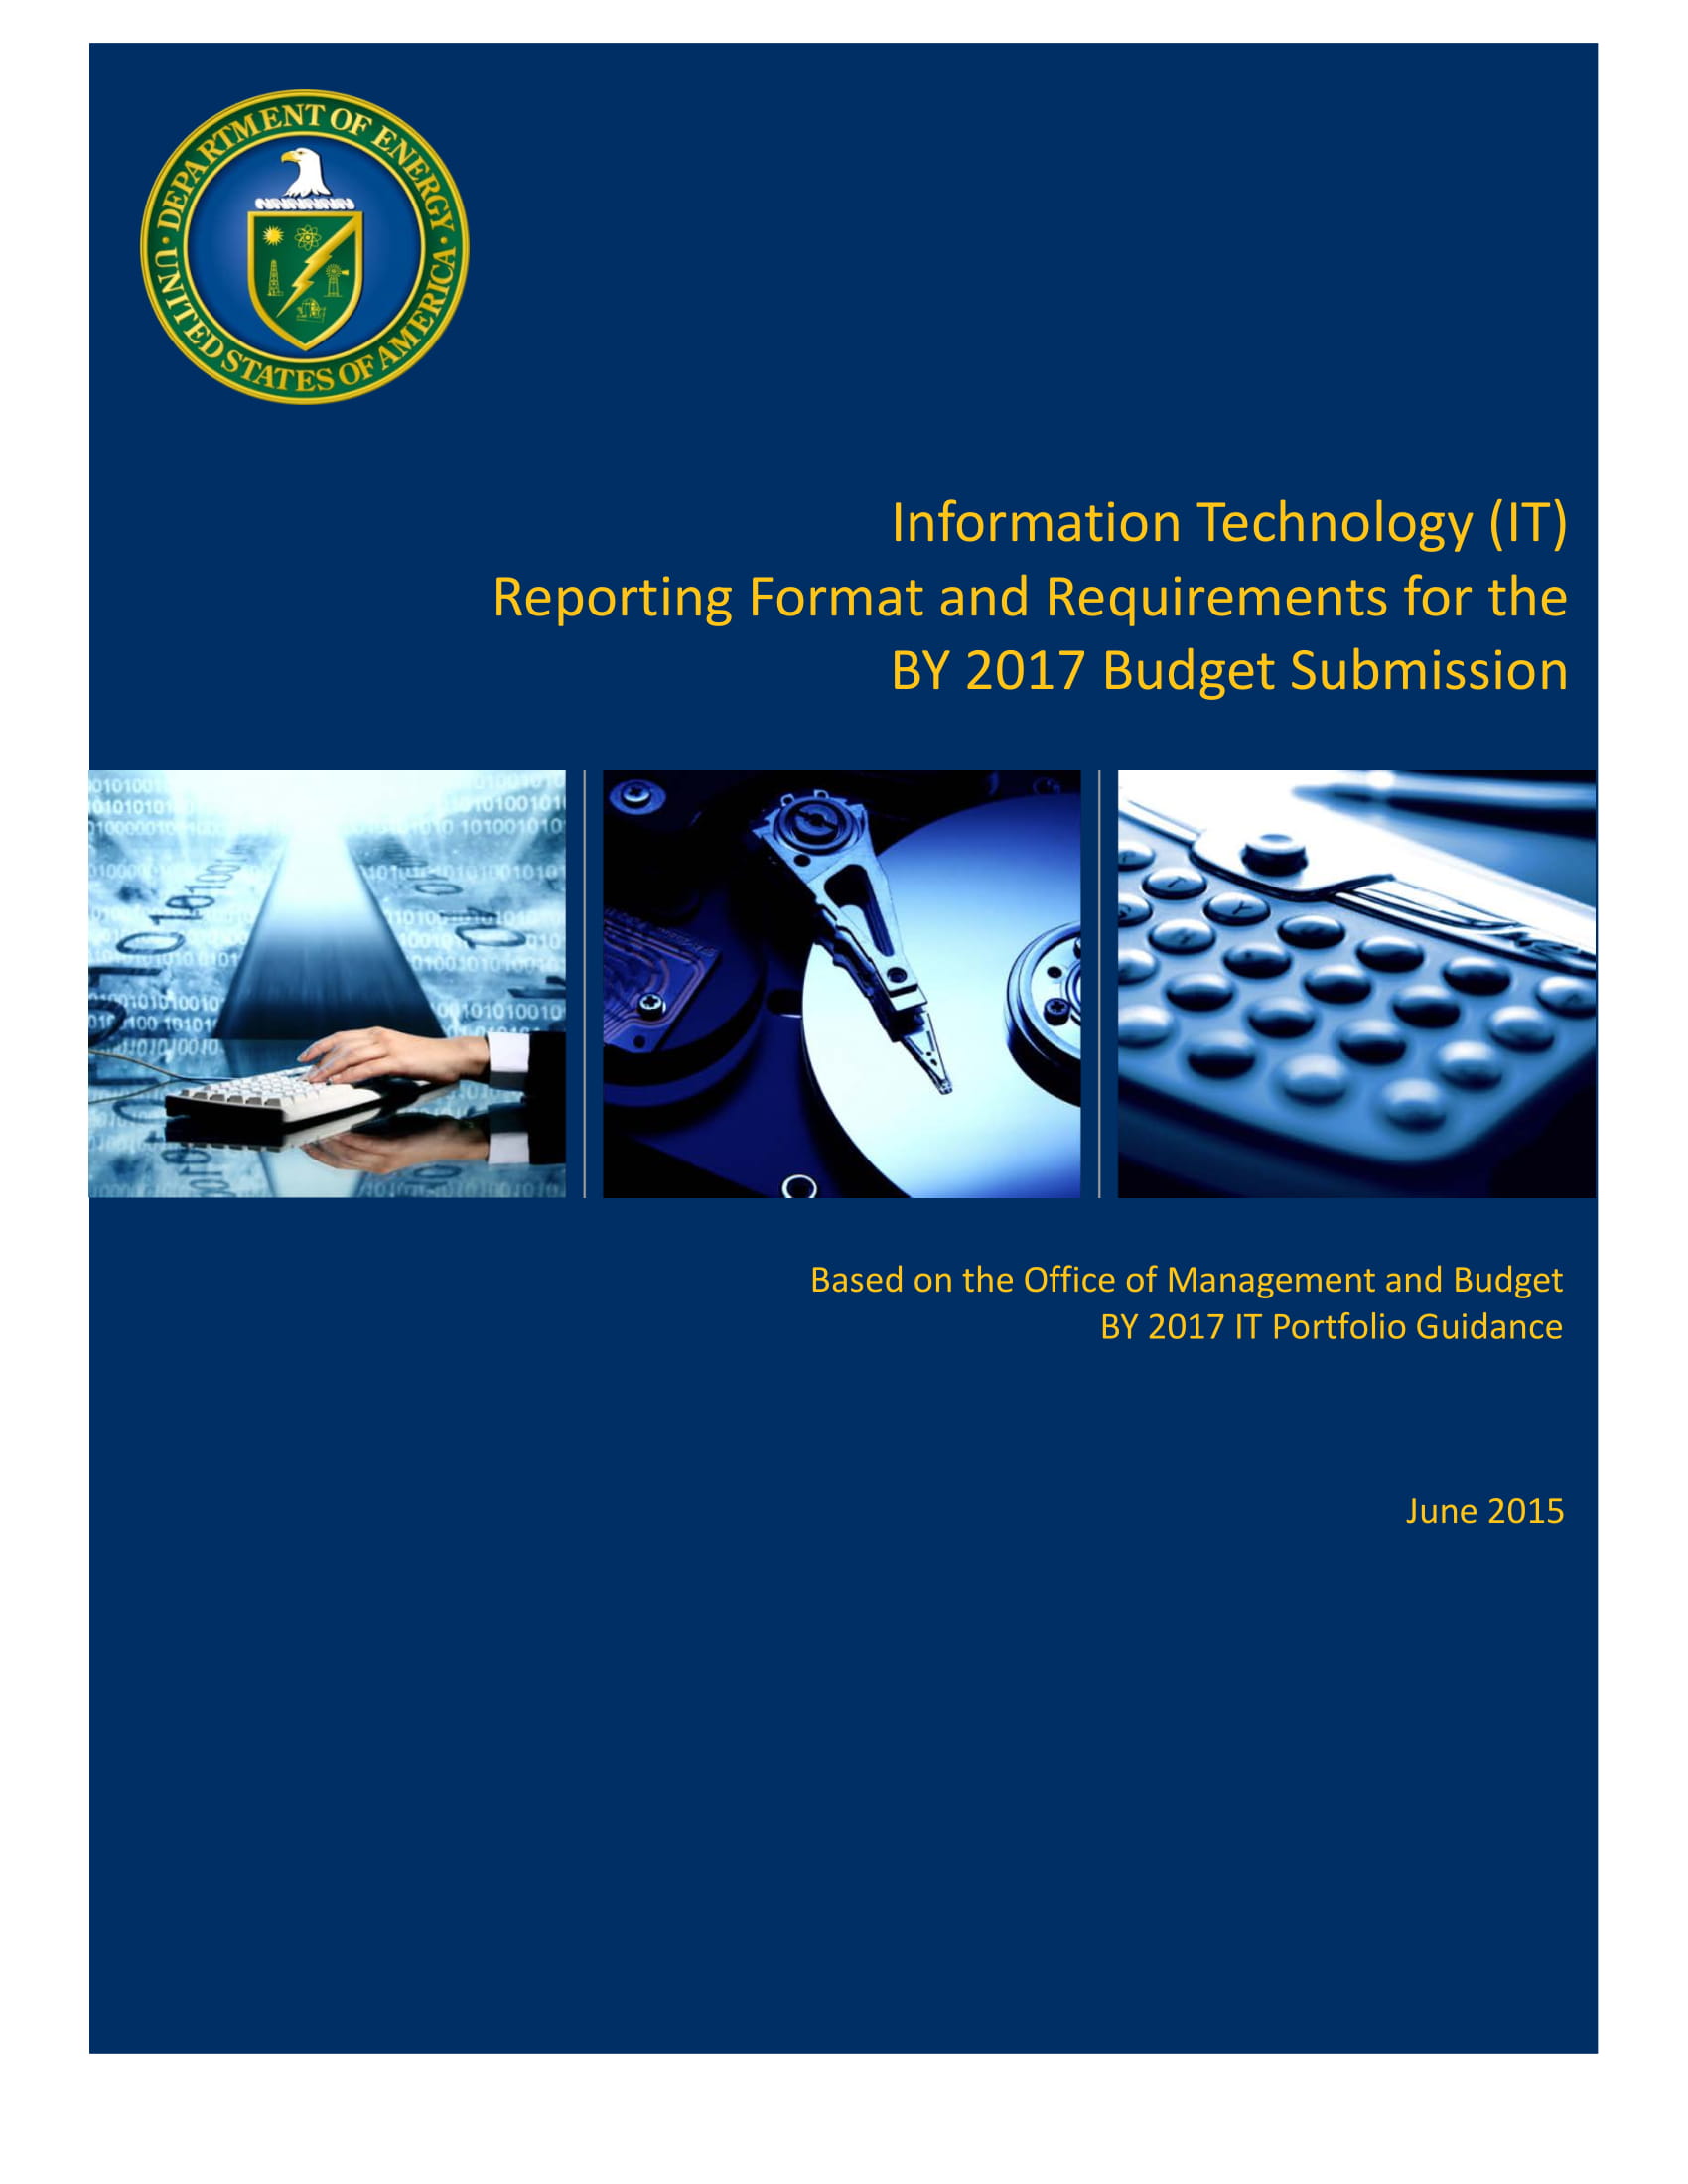 22 IT Management Report Template Examples - PDF  Examples Within It Management Report Template